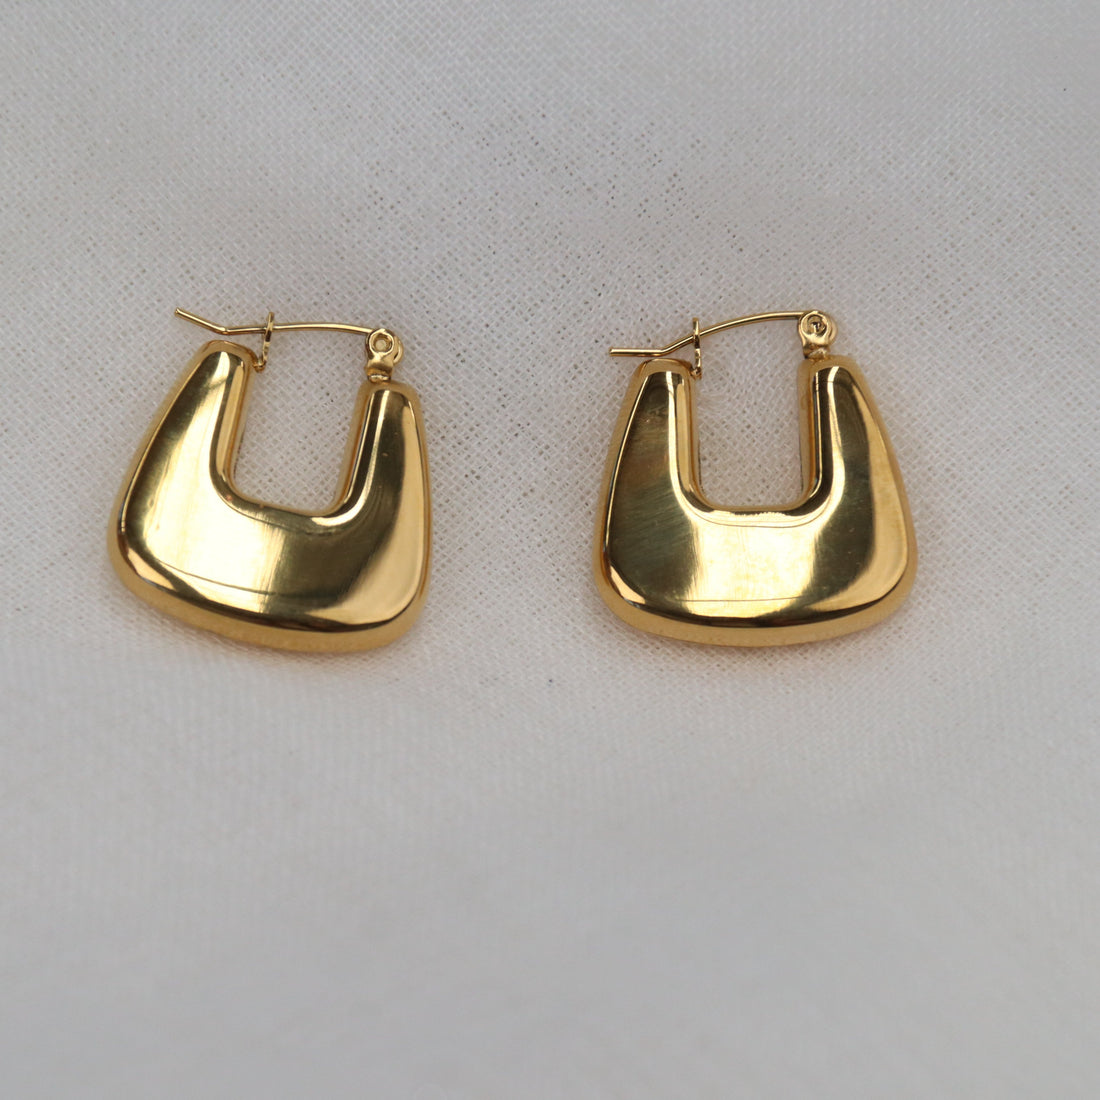 Sarah | 18k Statement Gold or Sterling Silver Earrings